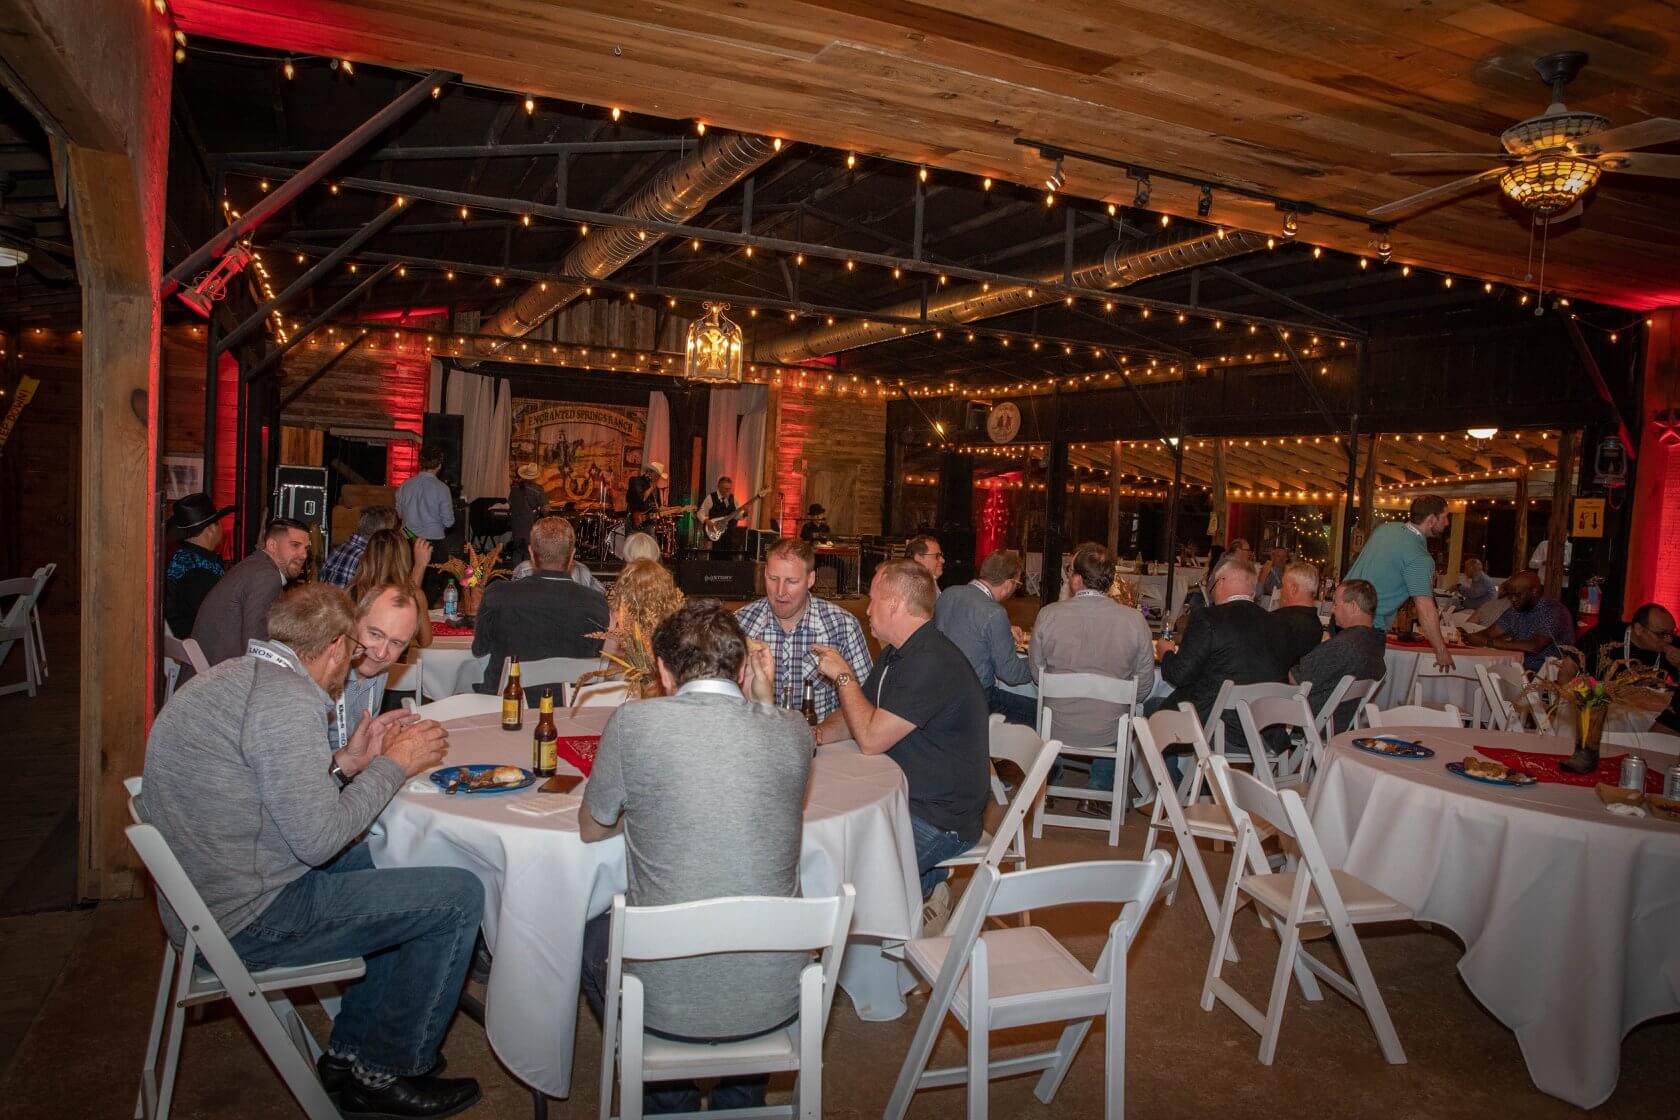 A corporate group enjoying a business dinner at Enchanted Springs Ranch